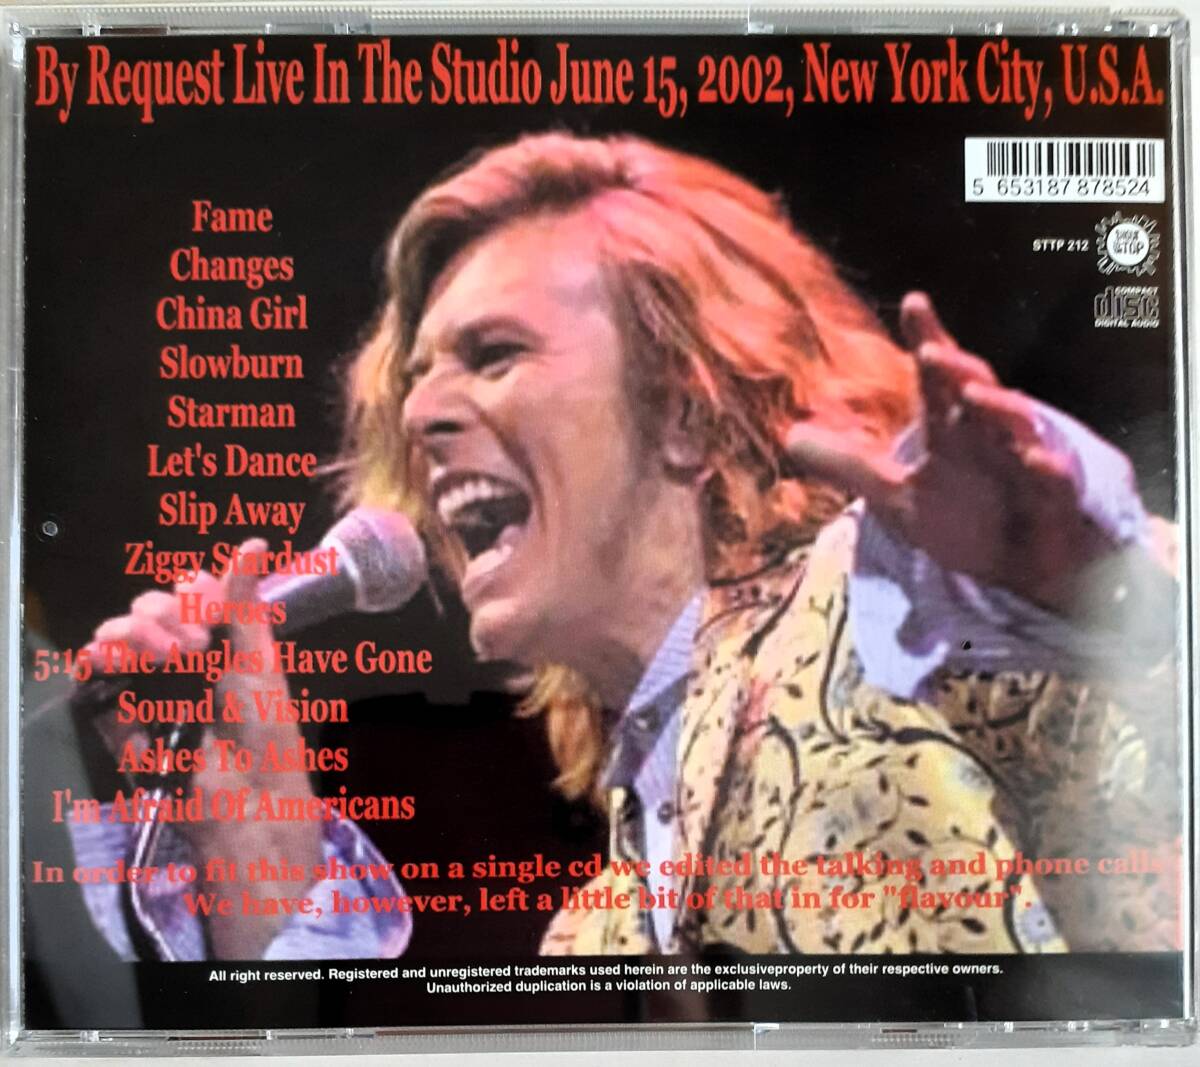 DAVID BOWIE Lust for Life live 1995-1996 Her Androgynous Majesty Requests & Requires Live 2002.6.15 NY 以上SB+プレス 他1作 3作4CD_画像9